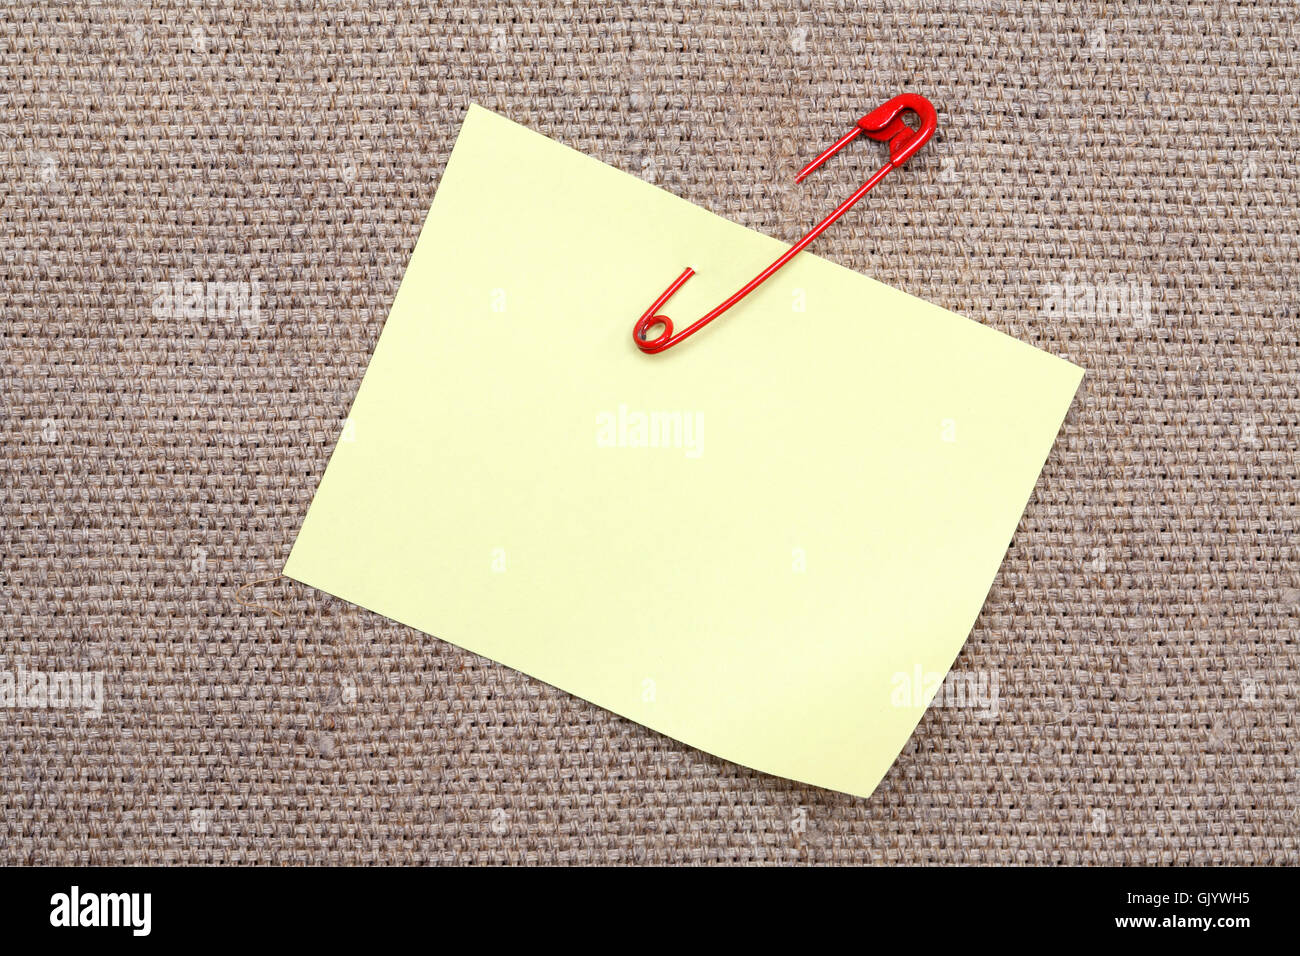 Adhesive Note And Safety Pin Stock Photo